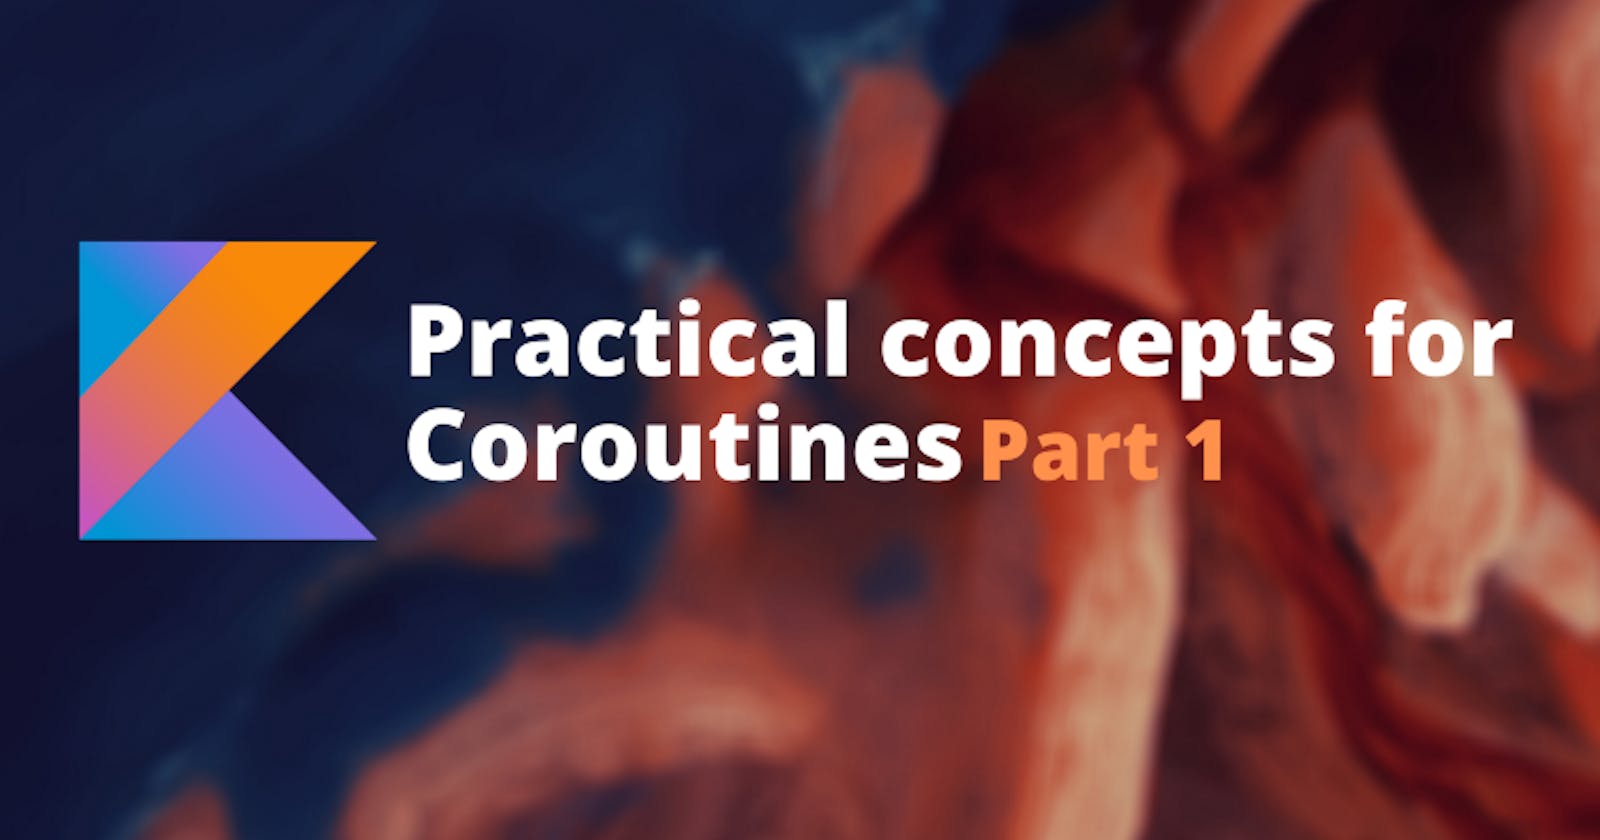 Practical concepts for Coroutines (Part 1)